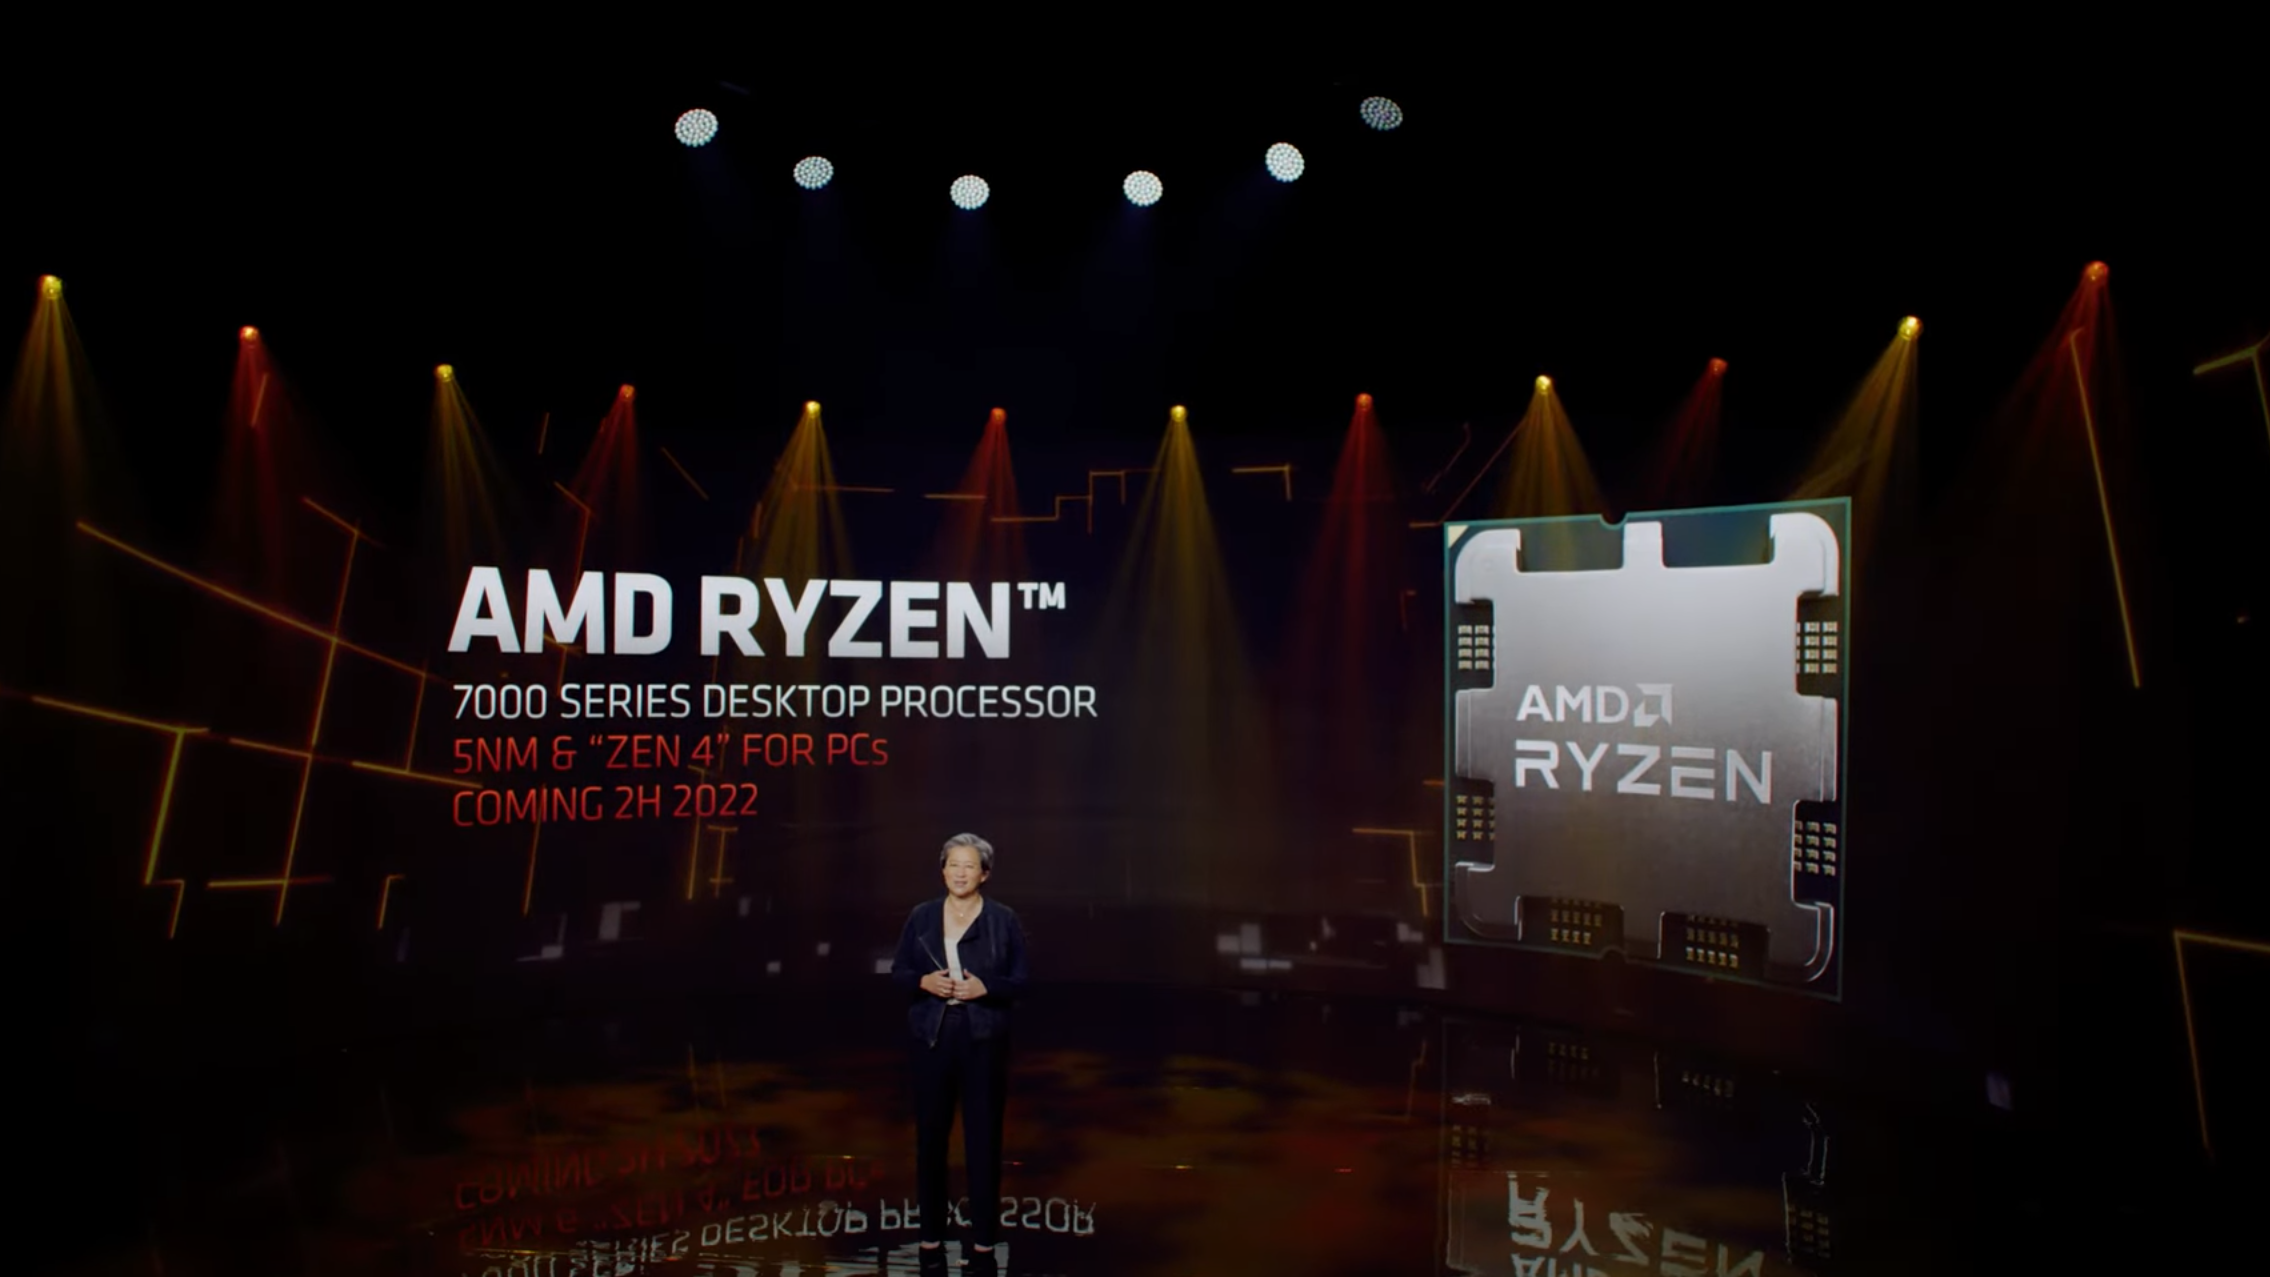 AMD CEO Dr Lisa Su reveals the AMD Ryzen 7000 CPU series on a stage.